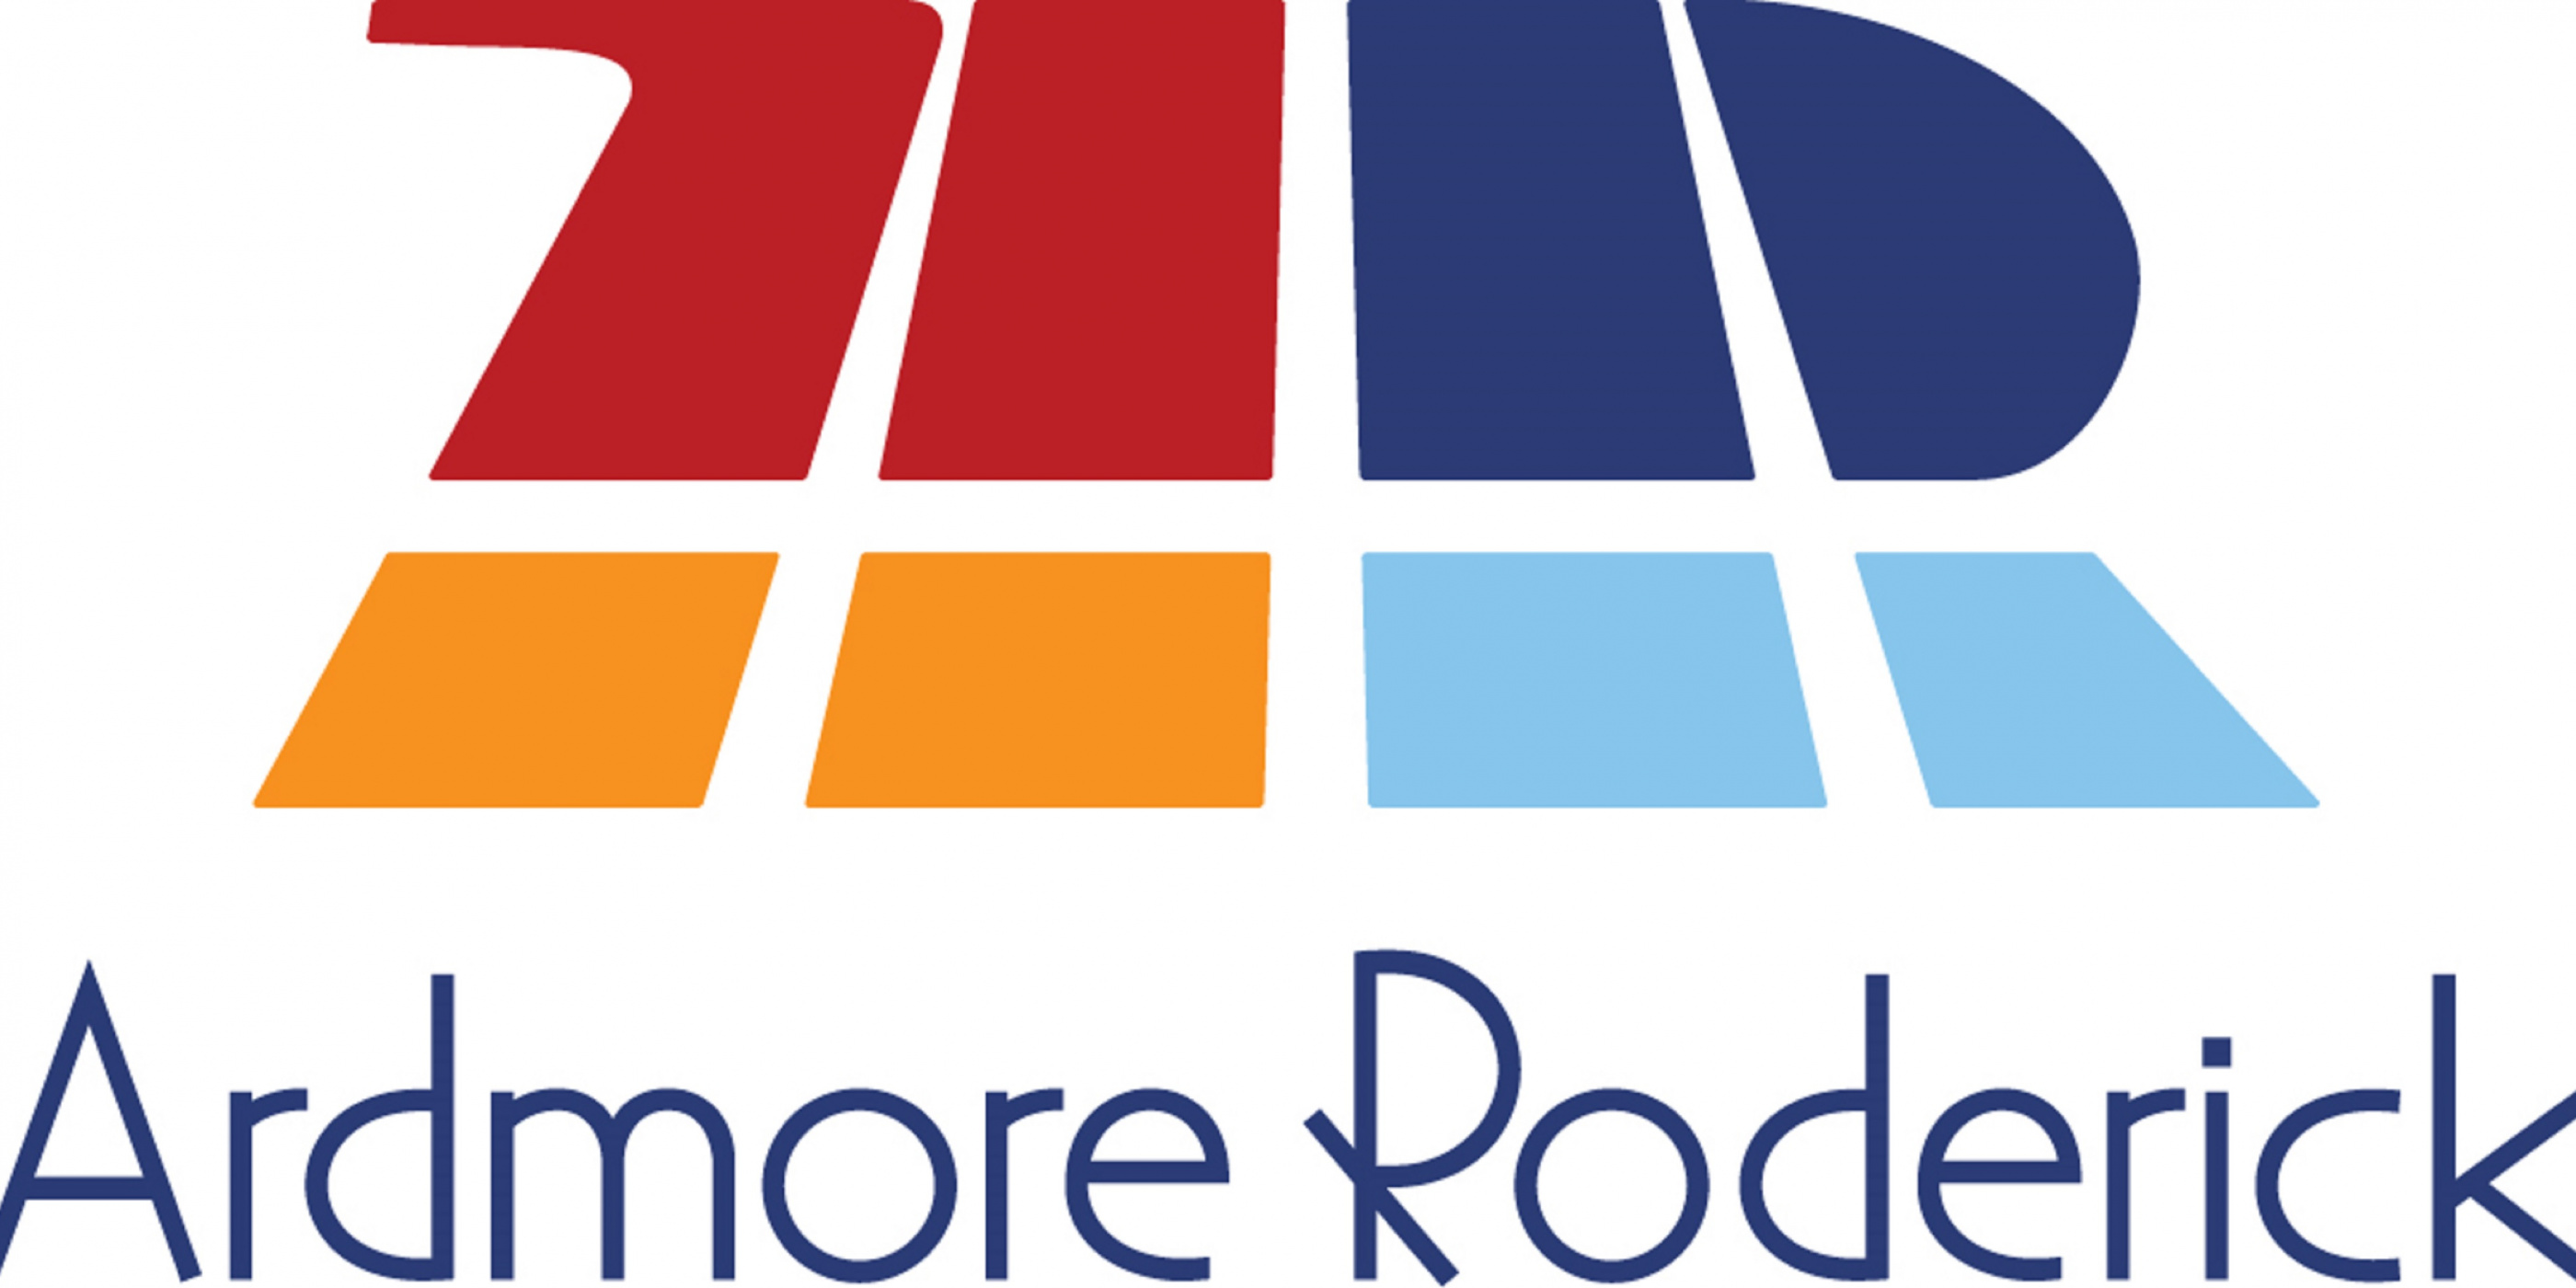 Chicago-based The Roderick Group & Ardmore Associates Join Forces, Create Engineering Powerhouse